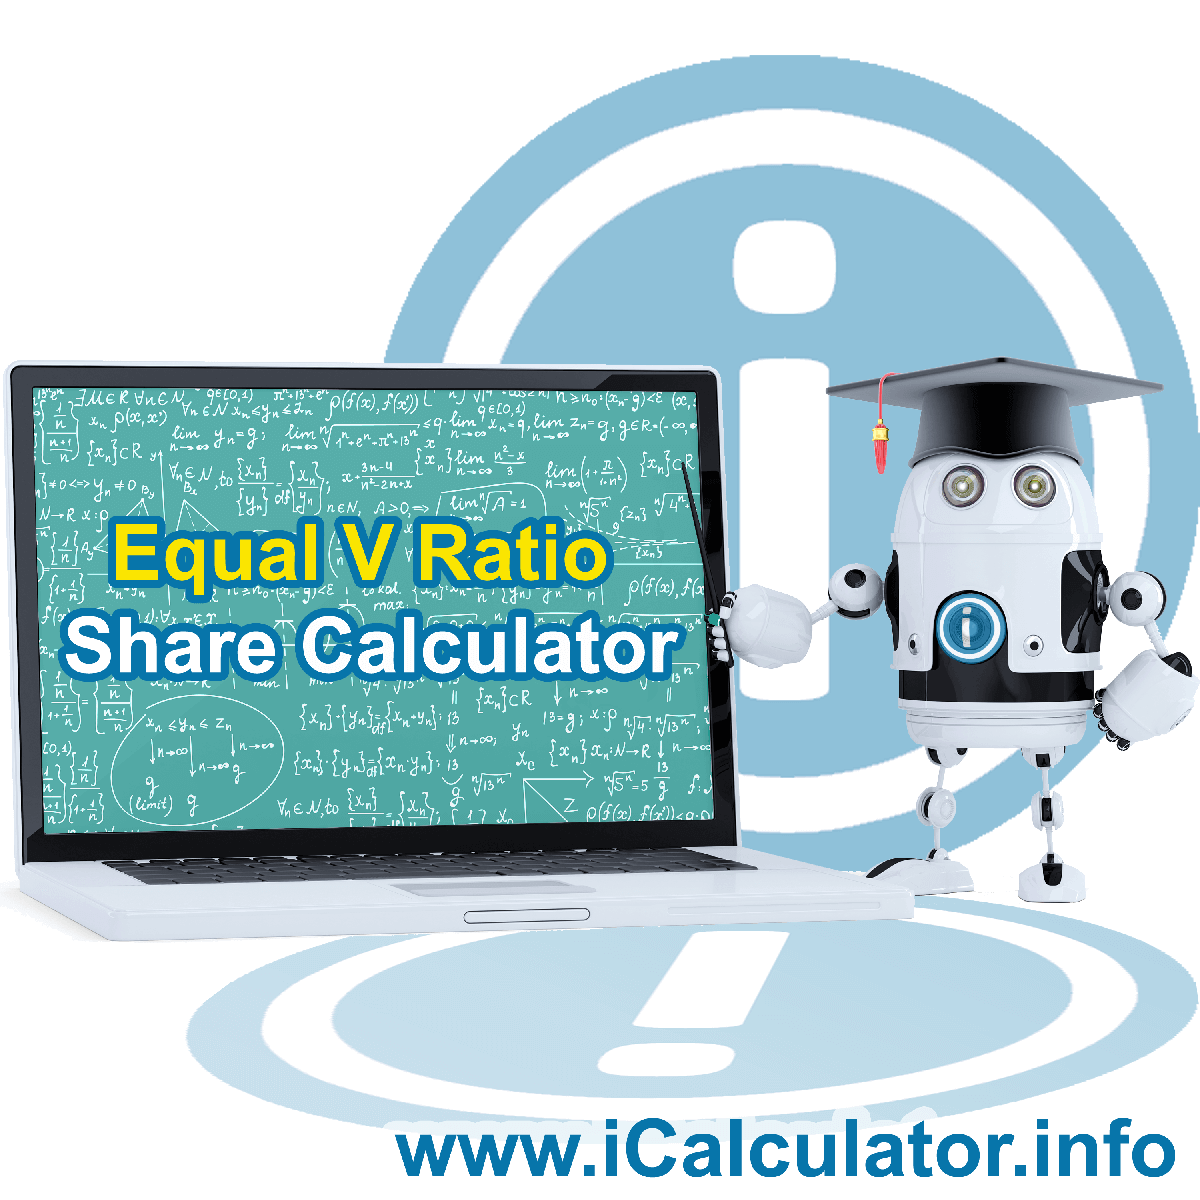 Equal Share verse Ratio Share. This image shows the properties and equal share verse ratio share formula for the Equal Share verse Ratio Share